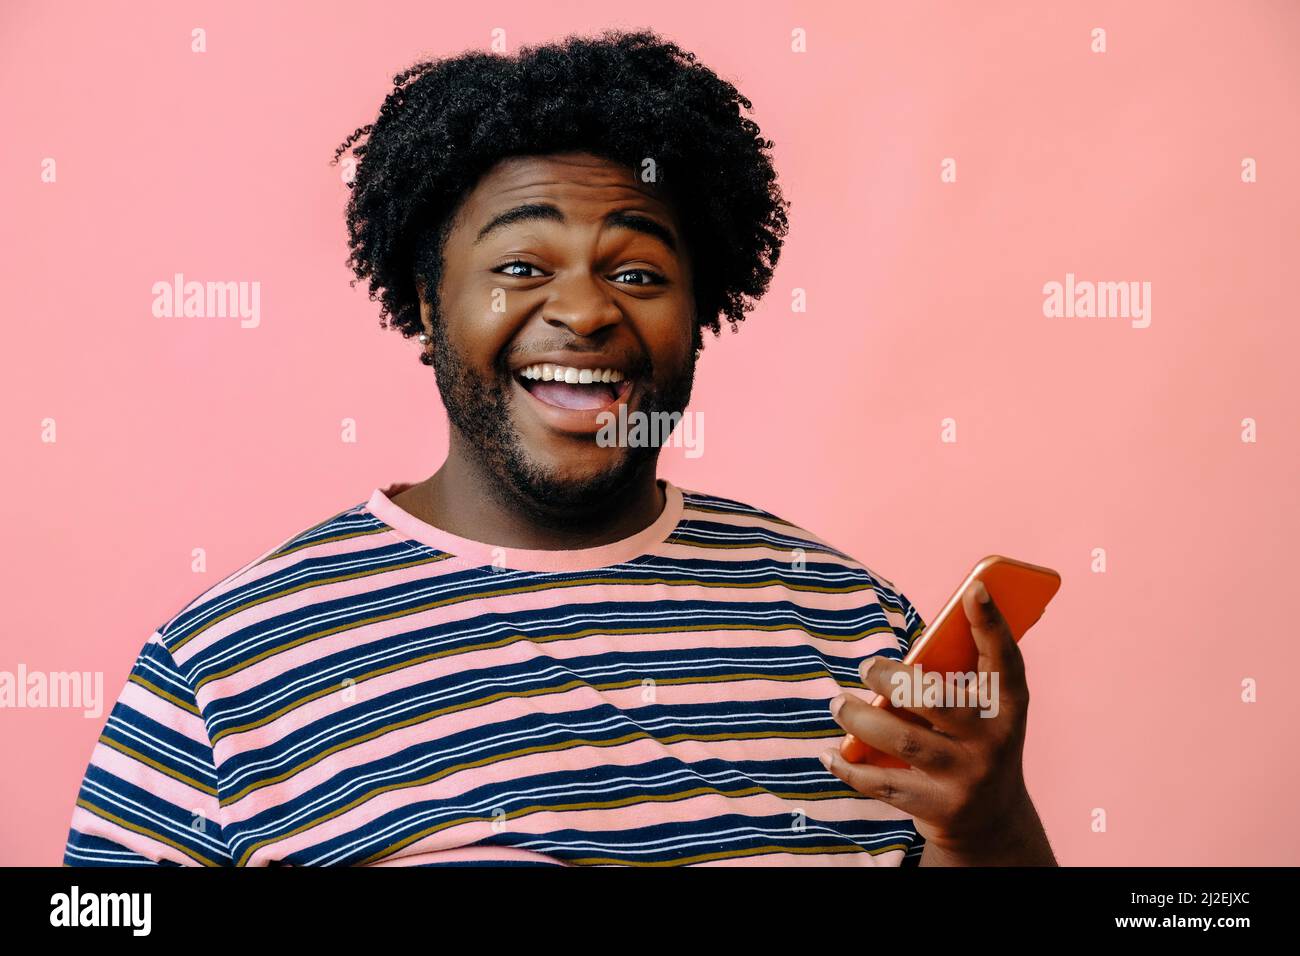 young happy black man with smart phone in the studio over pink background male model Stock Photo